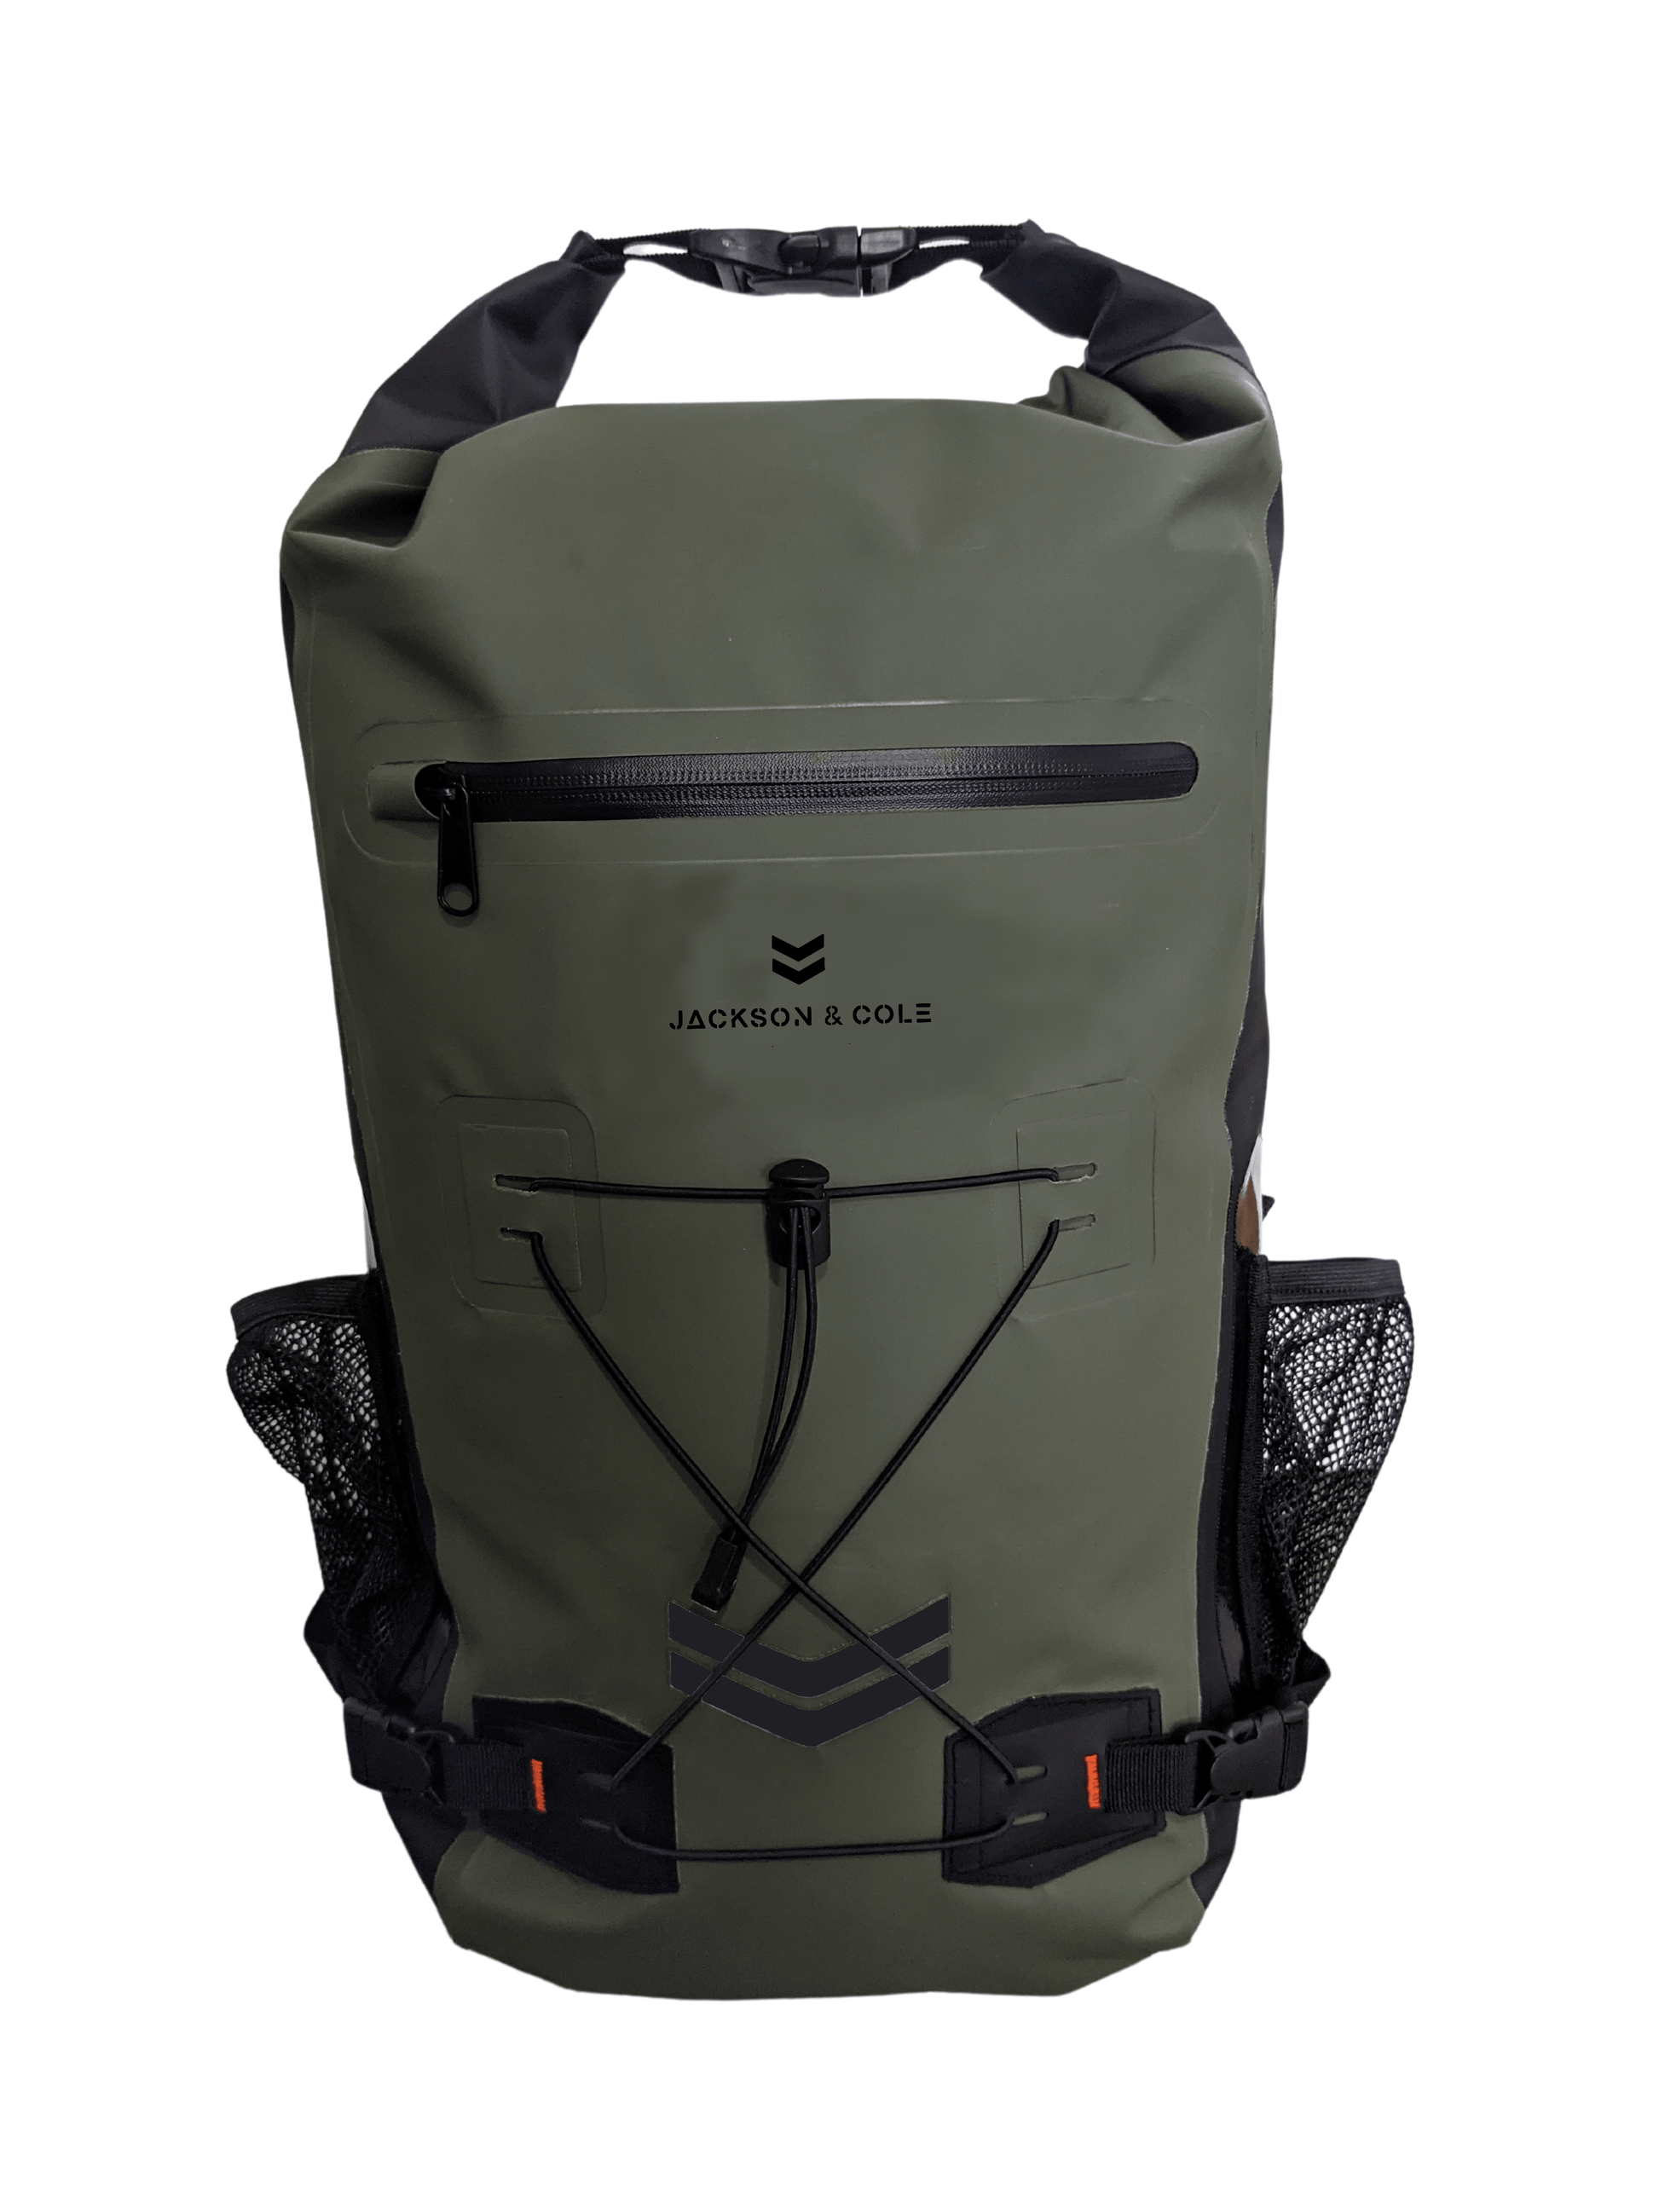 Aonyx 25 Backpack closed top